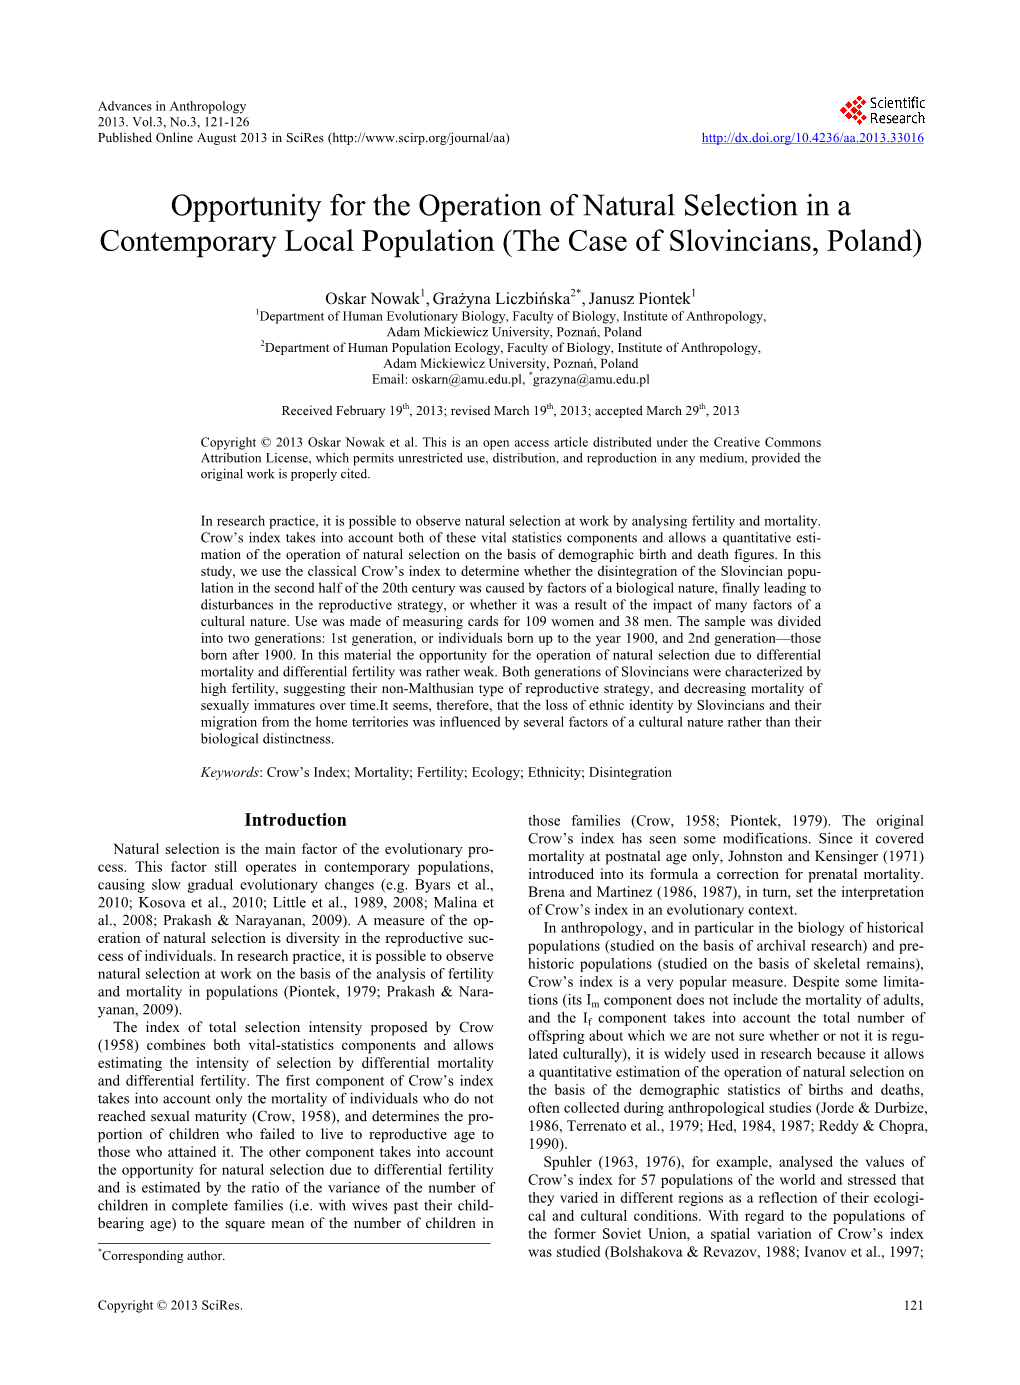 Opportunity for the Operation of Natural Selection in a Contemporary Local Population (The Case of Slovincians, Poland)